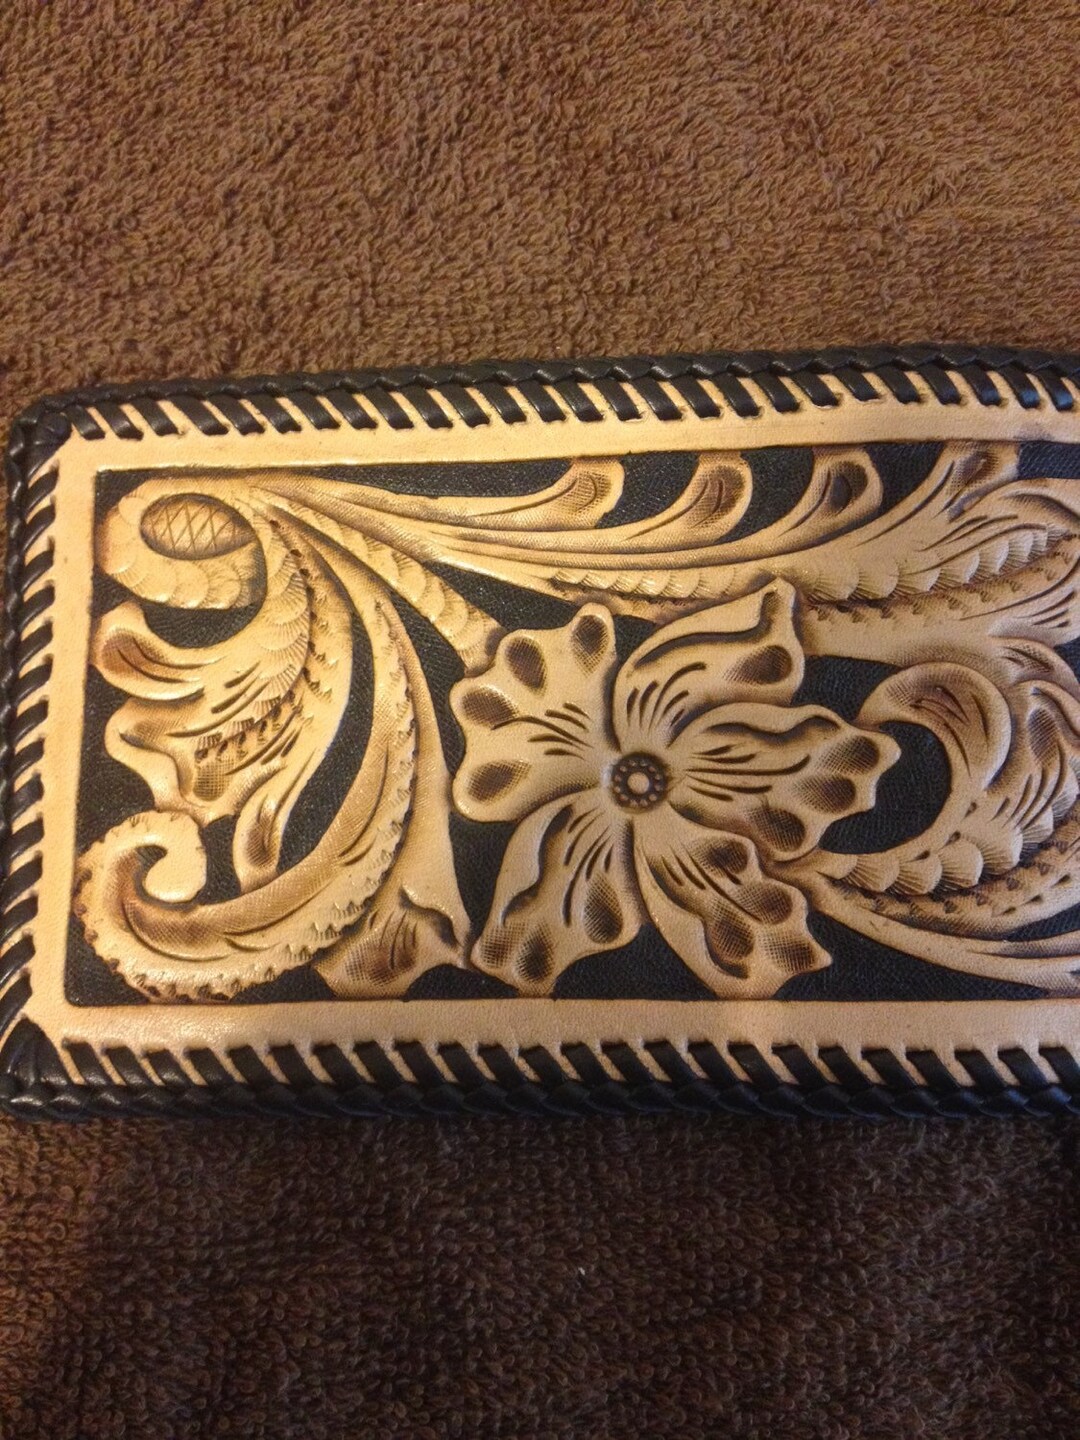 Hand Tooled Floral Wallet - Etsy